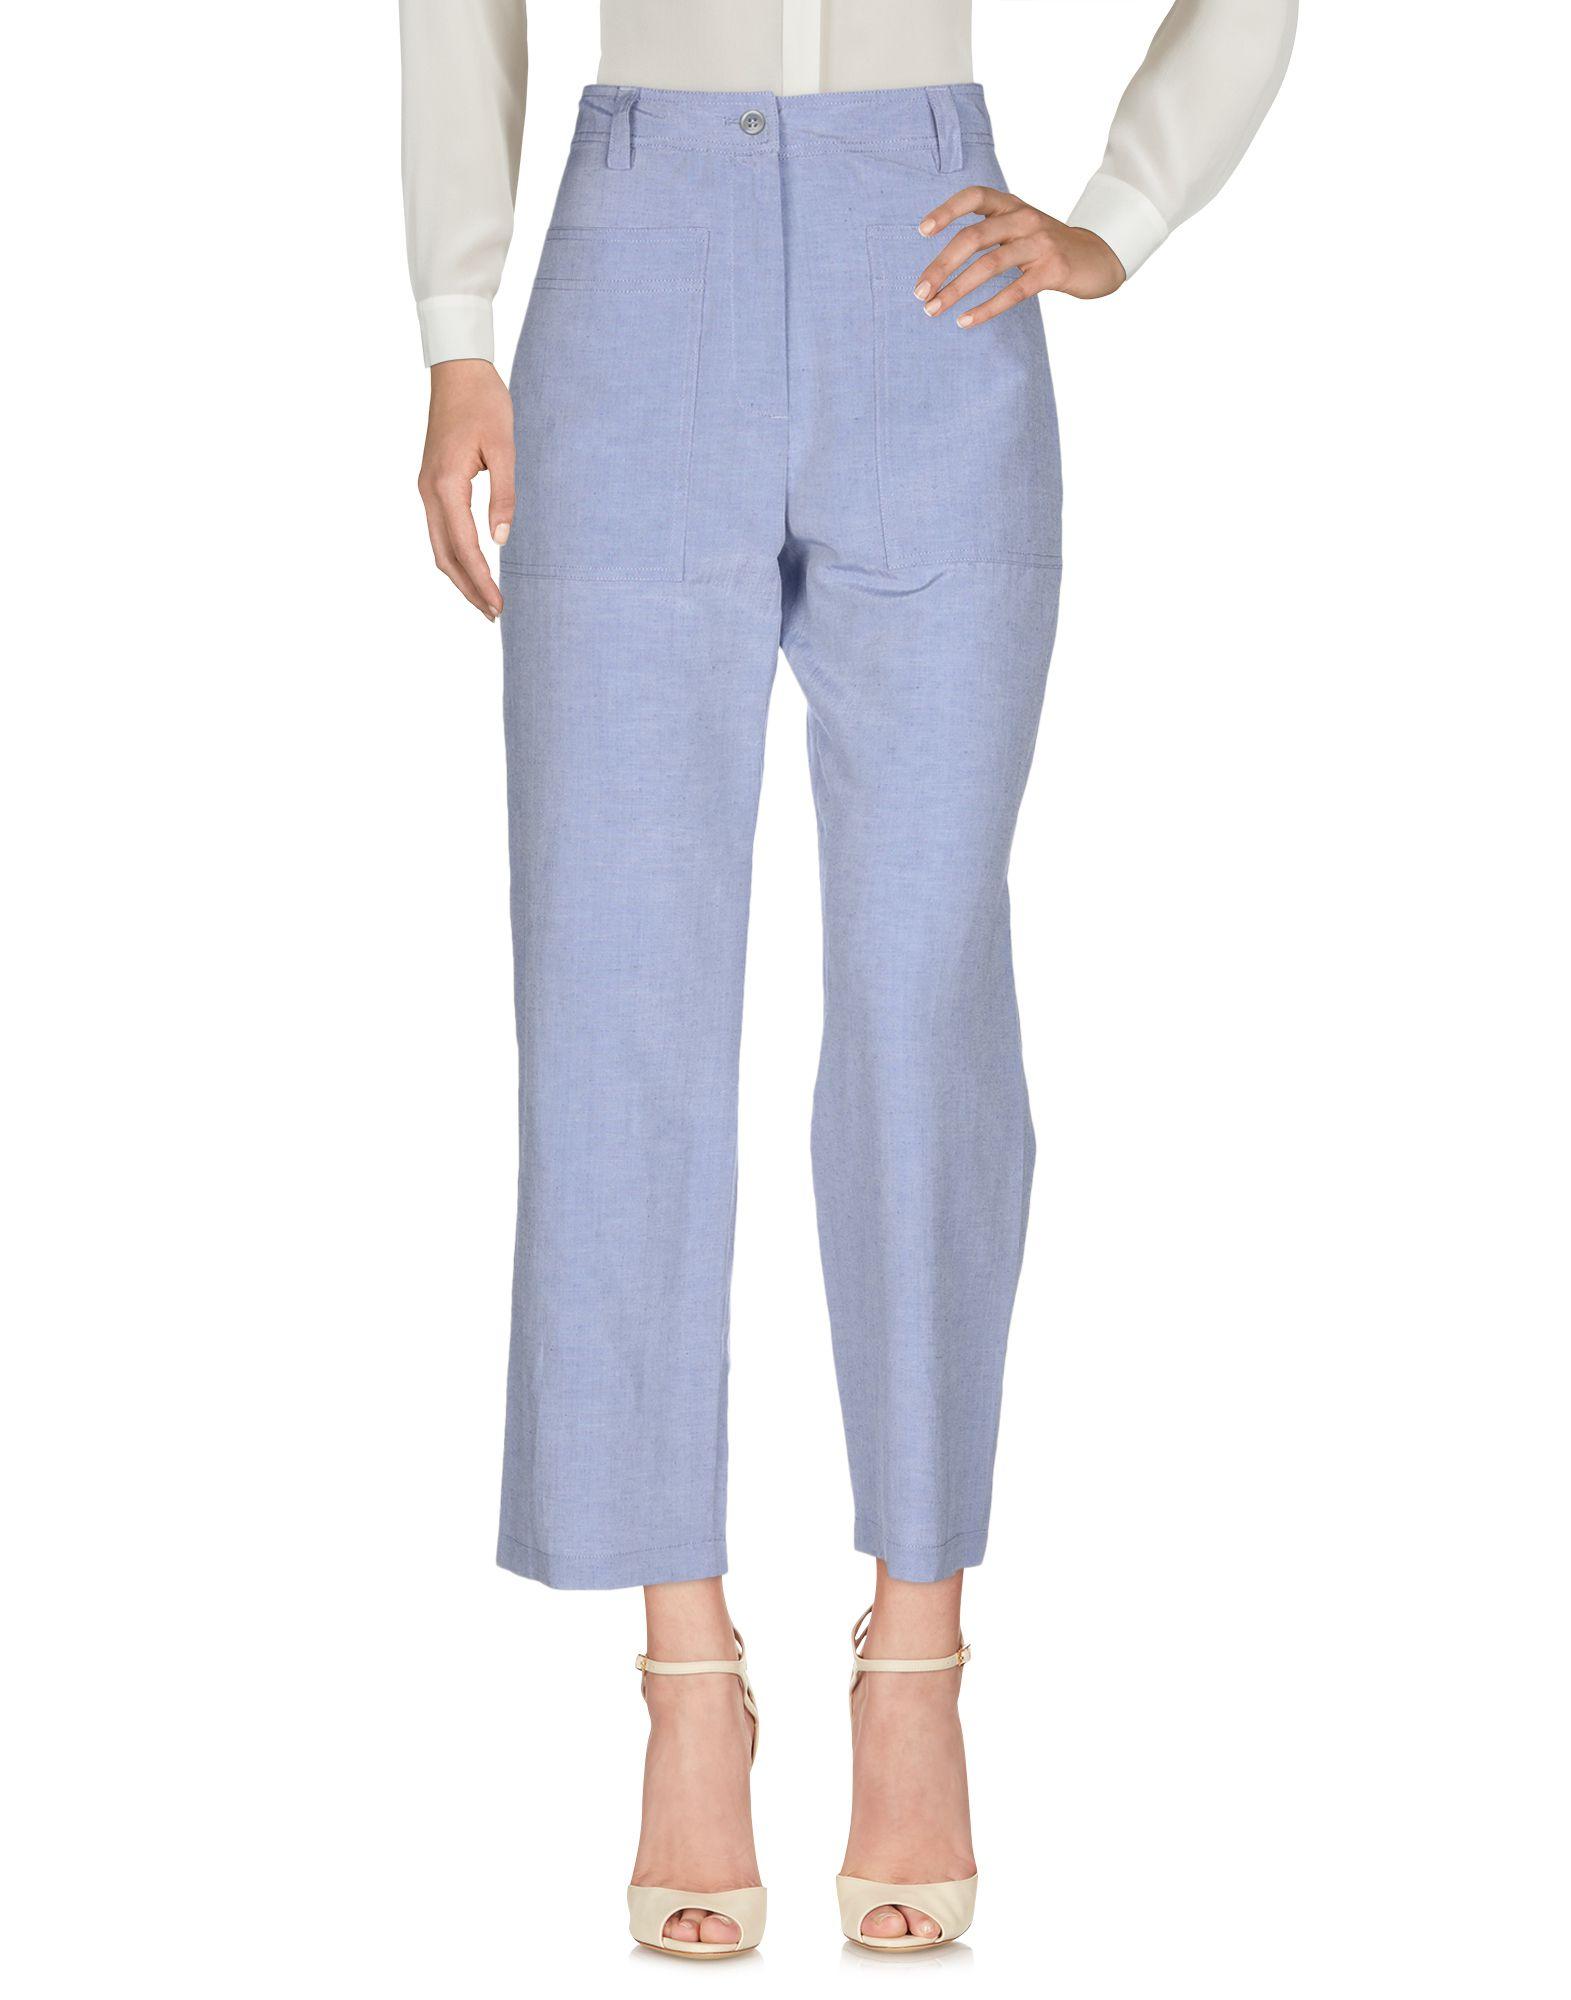 Emporio Armani Linen Casual Pants in Sky Blue (Blue) - Lyst